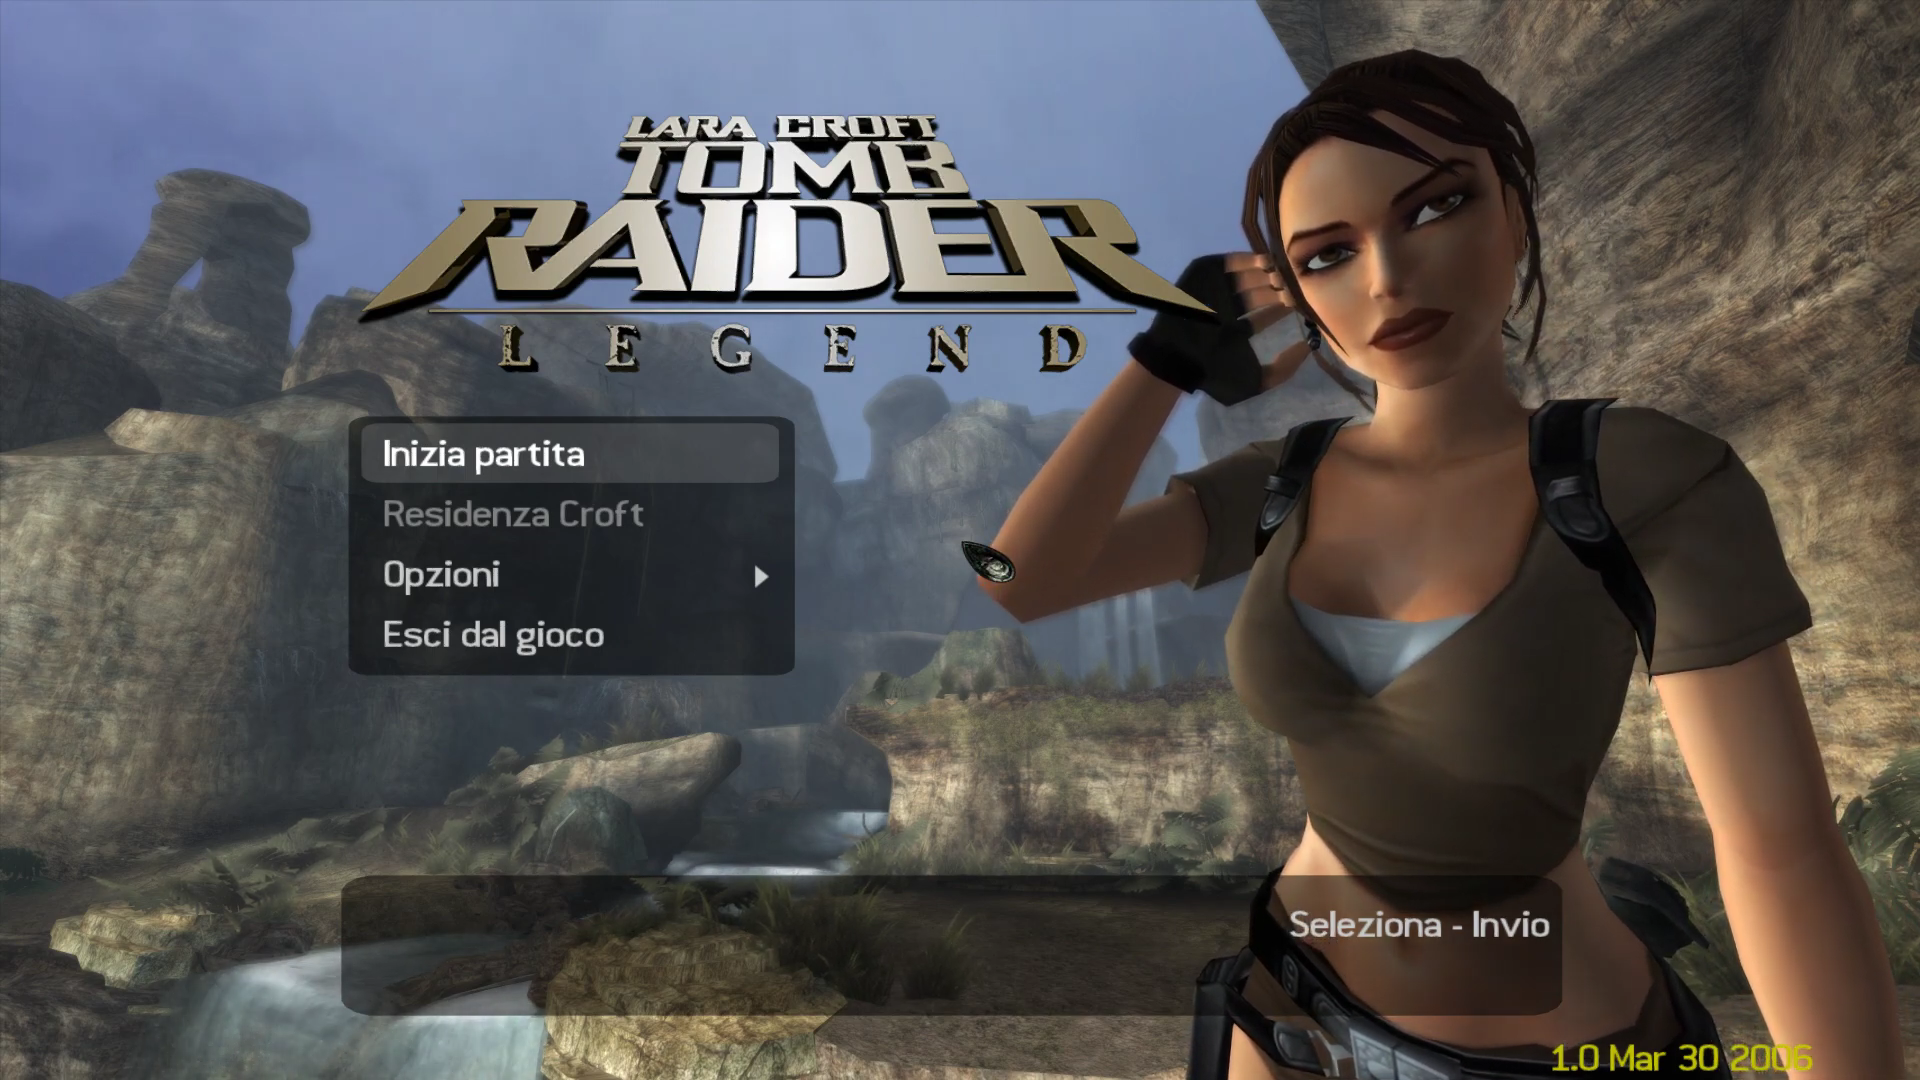 Media asset in full size related to 3dfxzone.it news item entitled as follows: Tomb Raider: Legend Demo | 1080p | 8x anti-aliasing & 16x anisotropic filtering | Image Name: news34035_Tomb-Raider-Legend_Screenshot_1.png